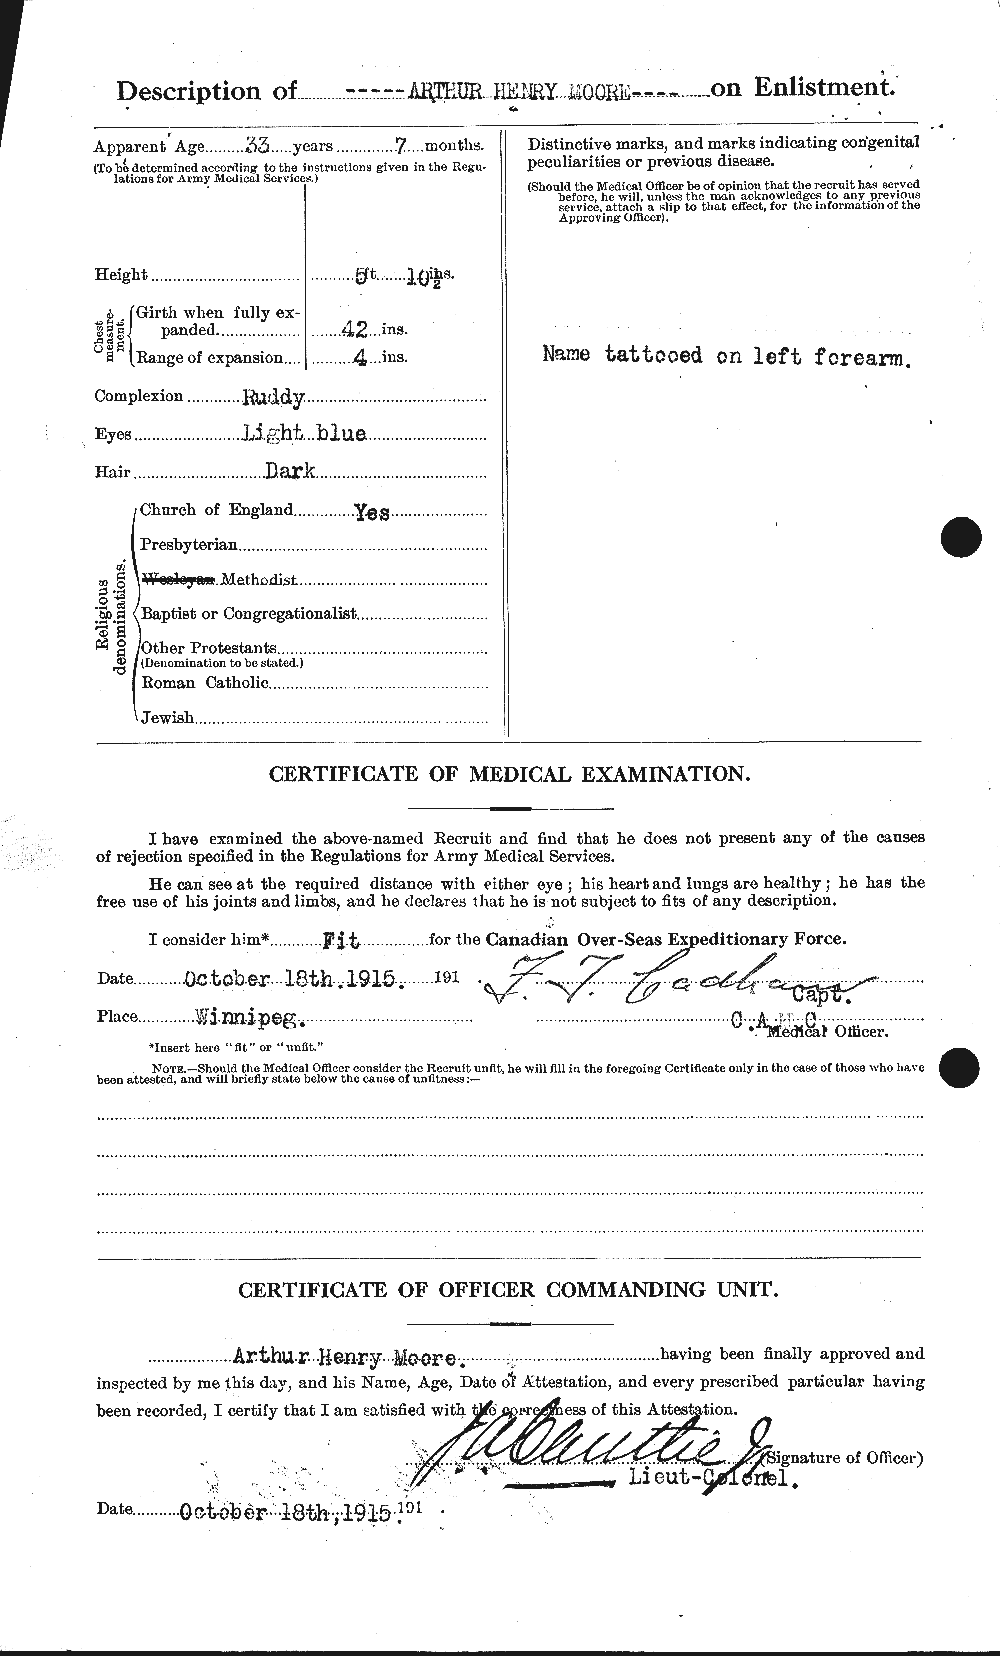 Personnel Records of the First World War - CEF 506447b